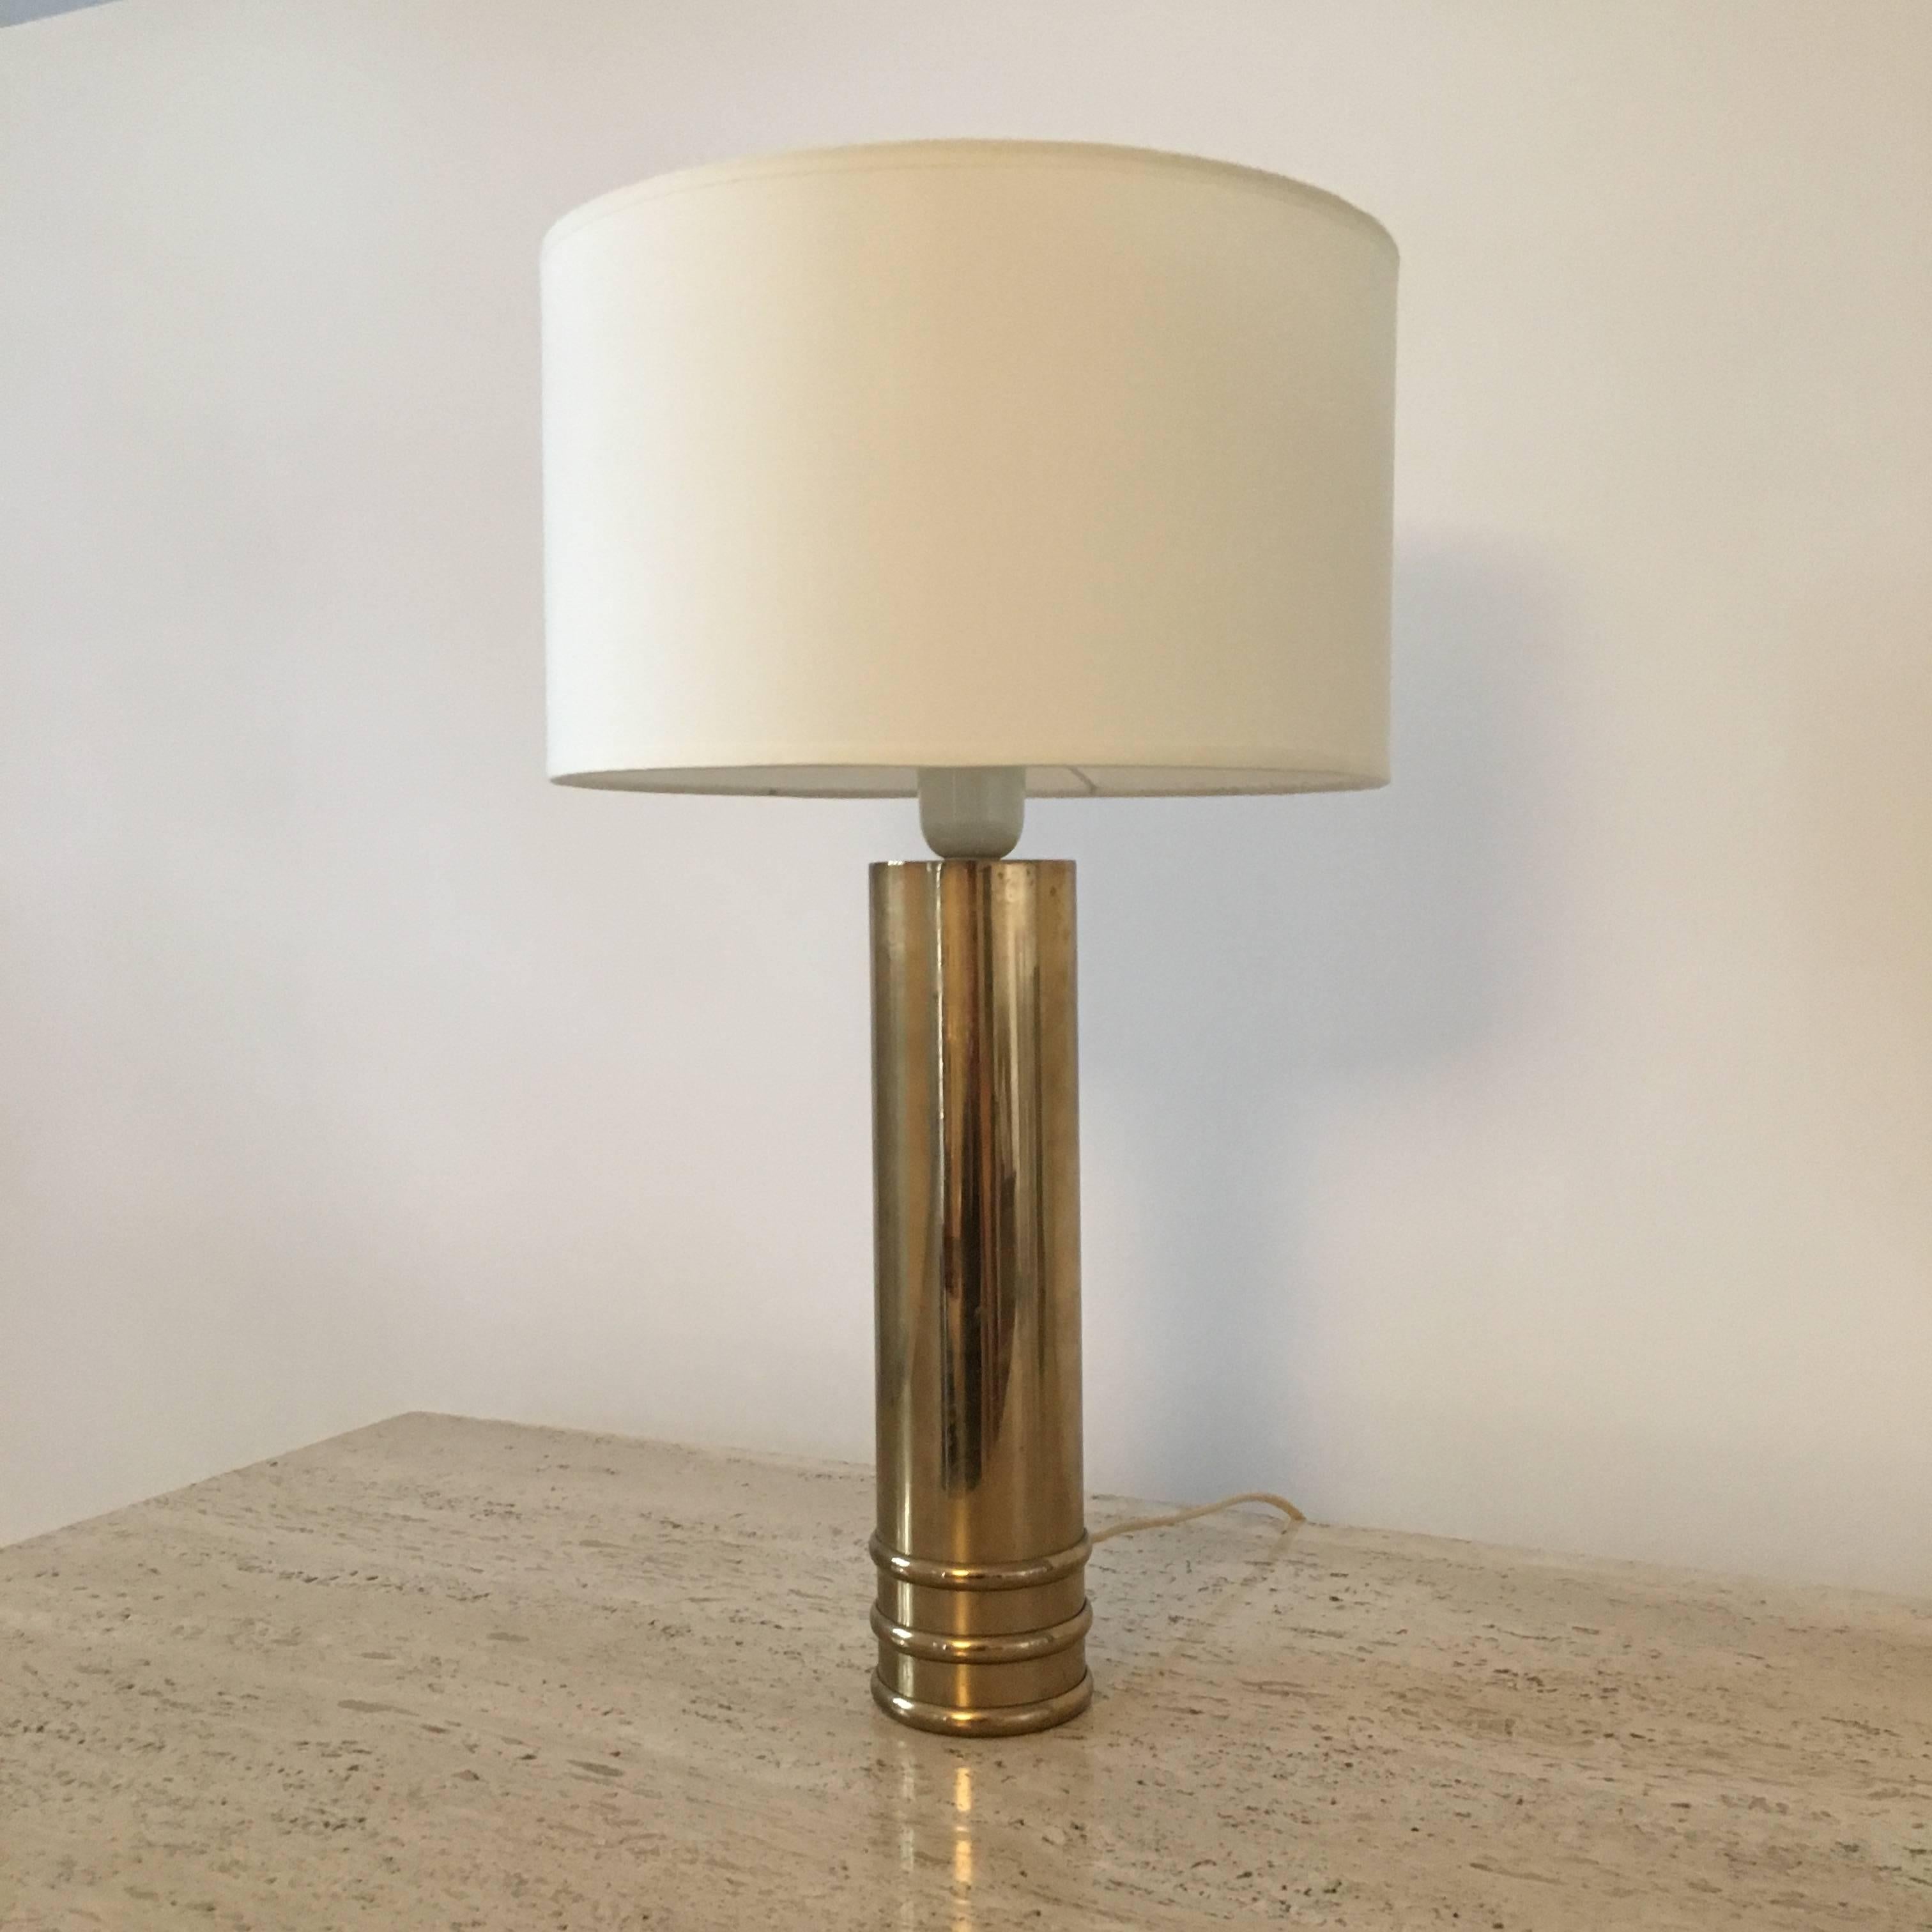 Pair of table lamps by Bergboms;
Manufactured in Sweden, circa 1960;
Brass, textile.
  